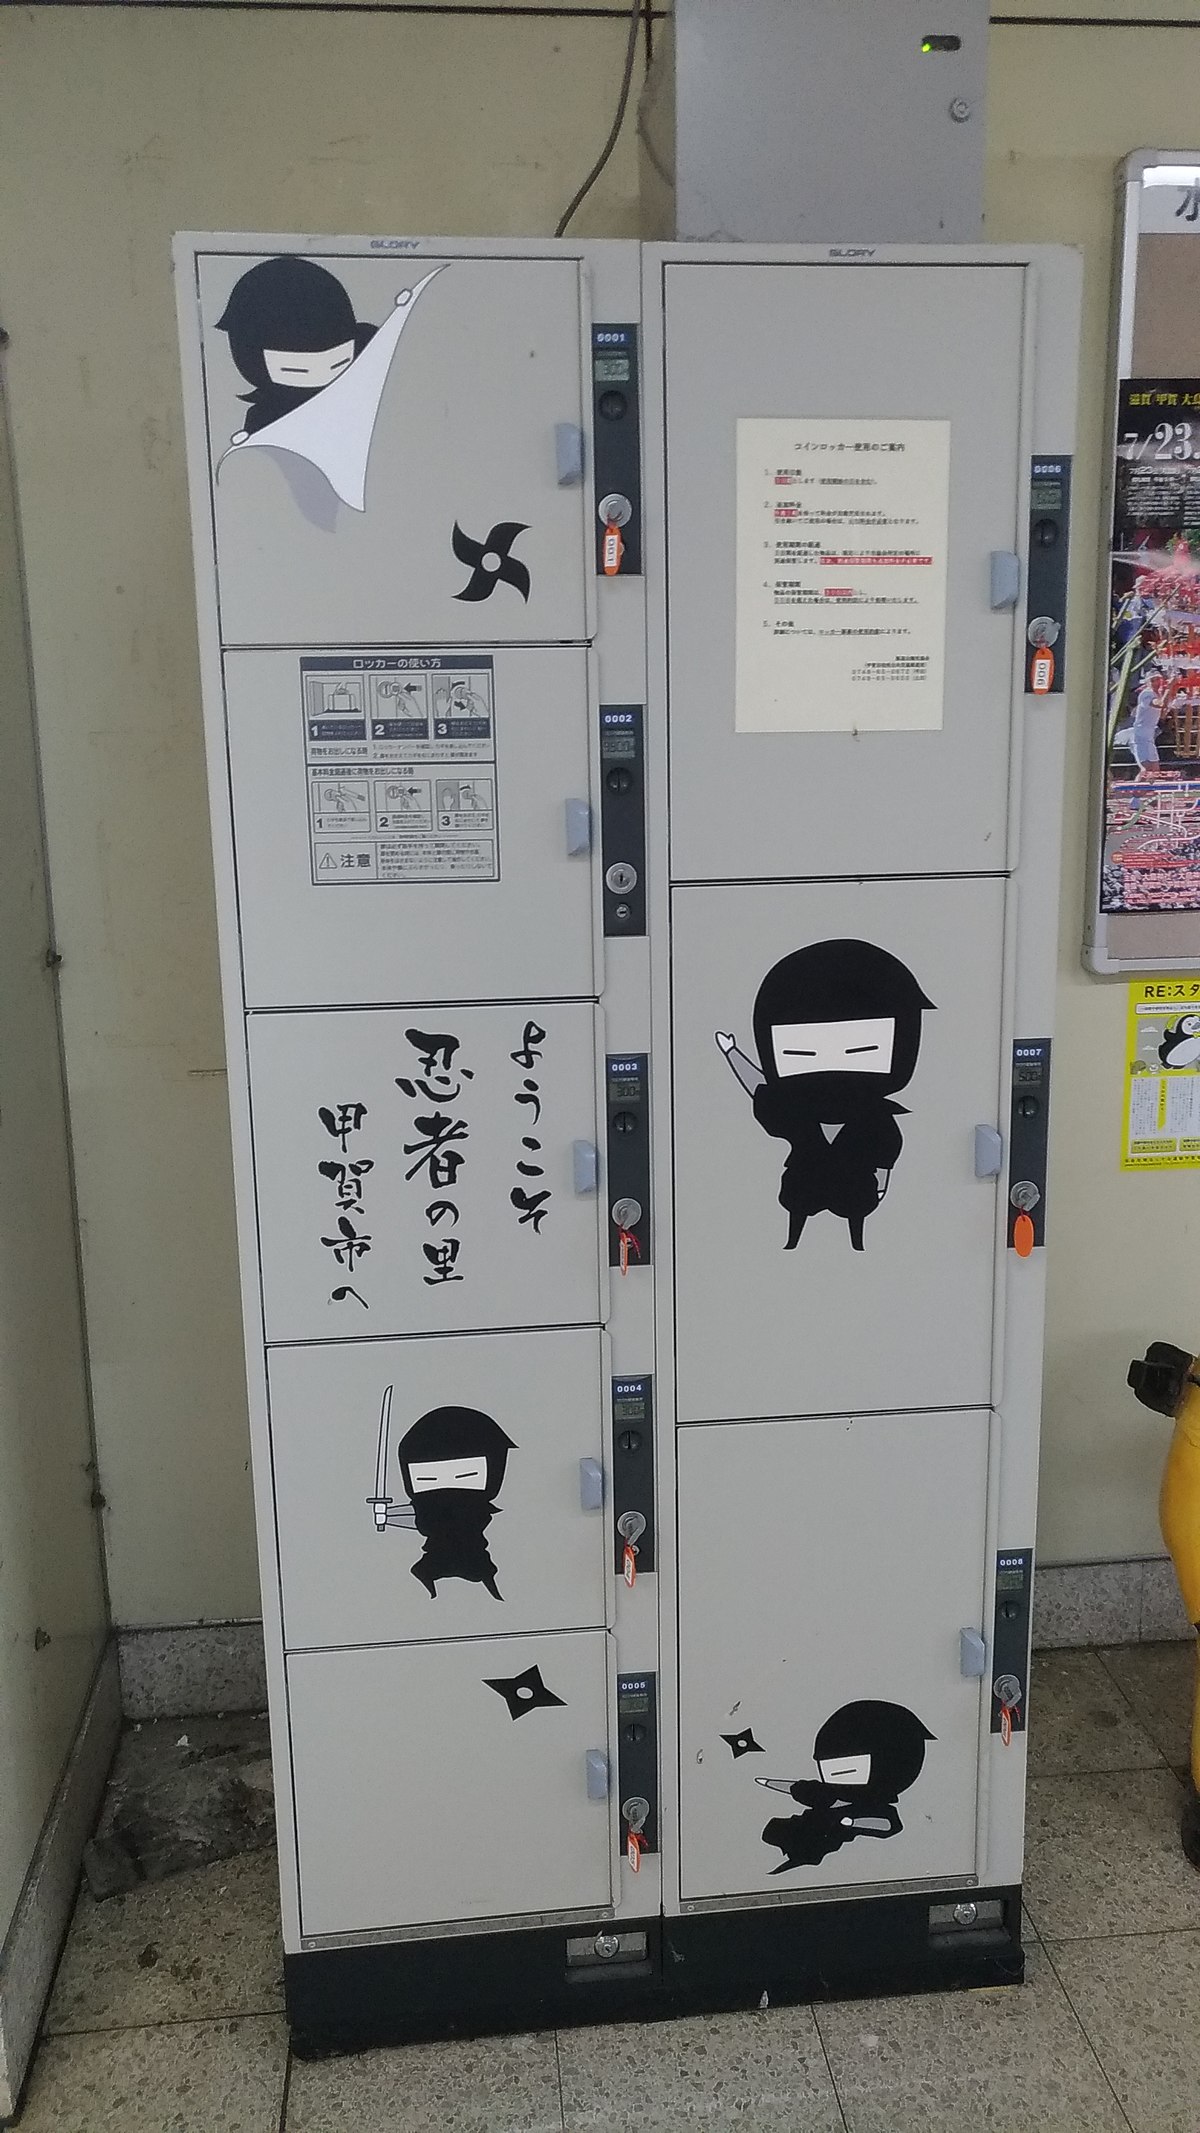 Body of newborn baby found in coin locker at train station in Tokyo - Japan Today